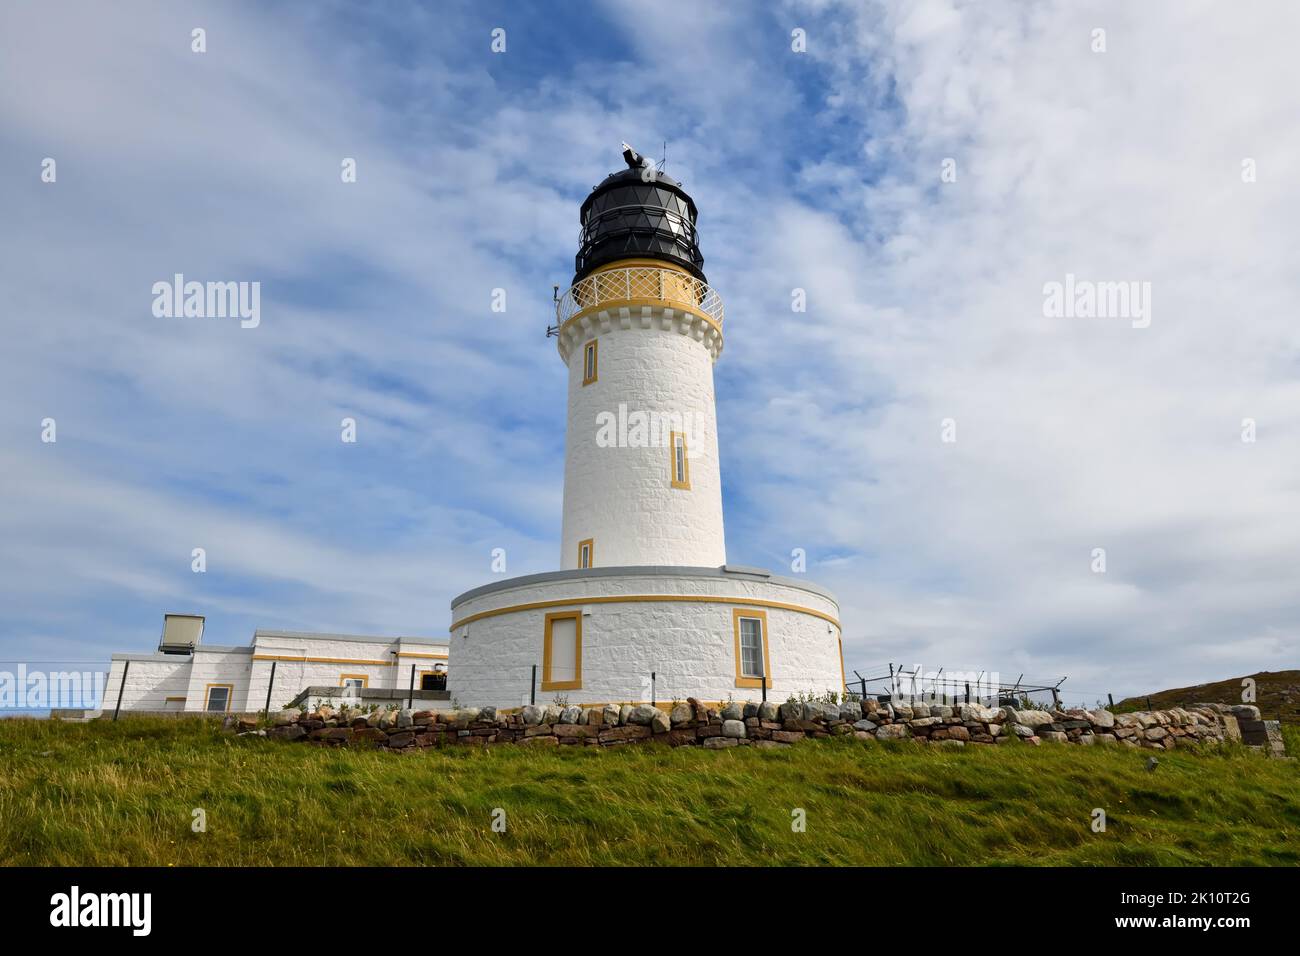 Cape Wrath Lighthouse in the most northwesterly point of Scotland was built in 1828 by Robert Stevenson. Stock Photo